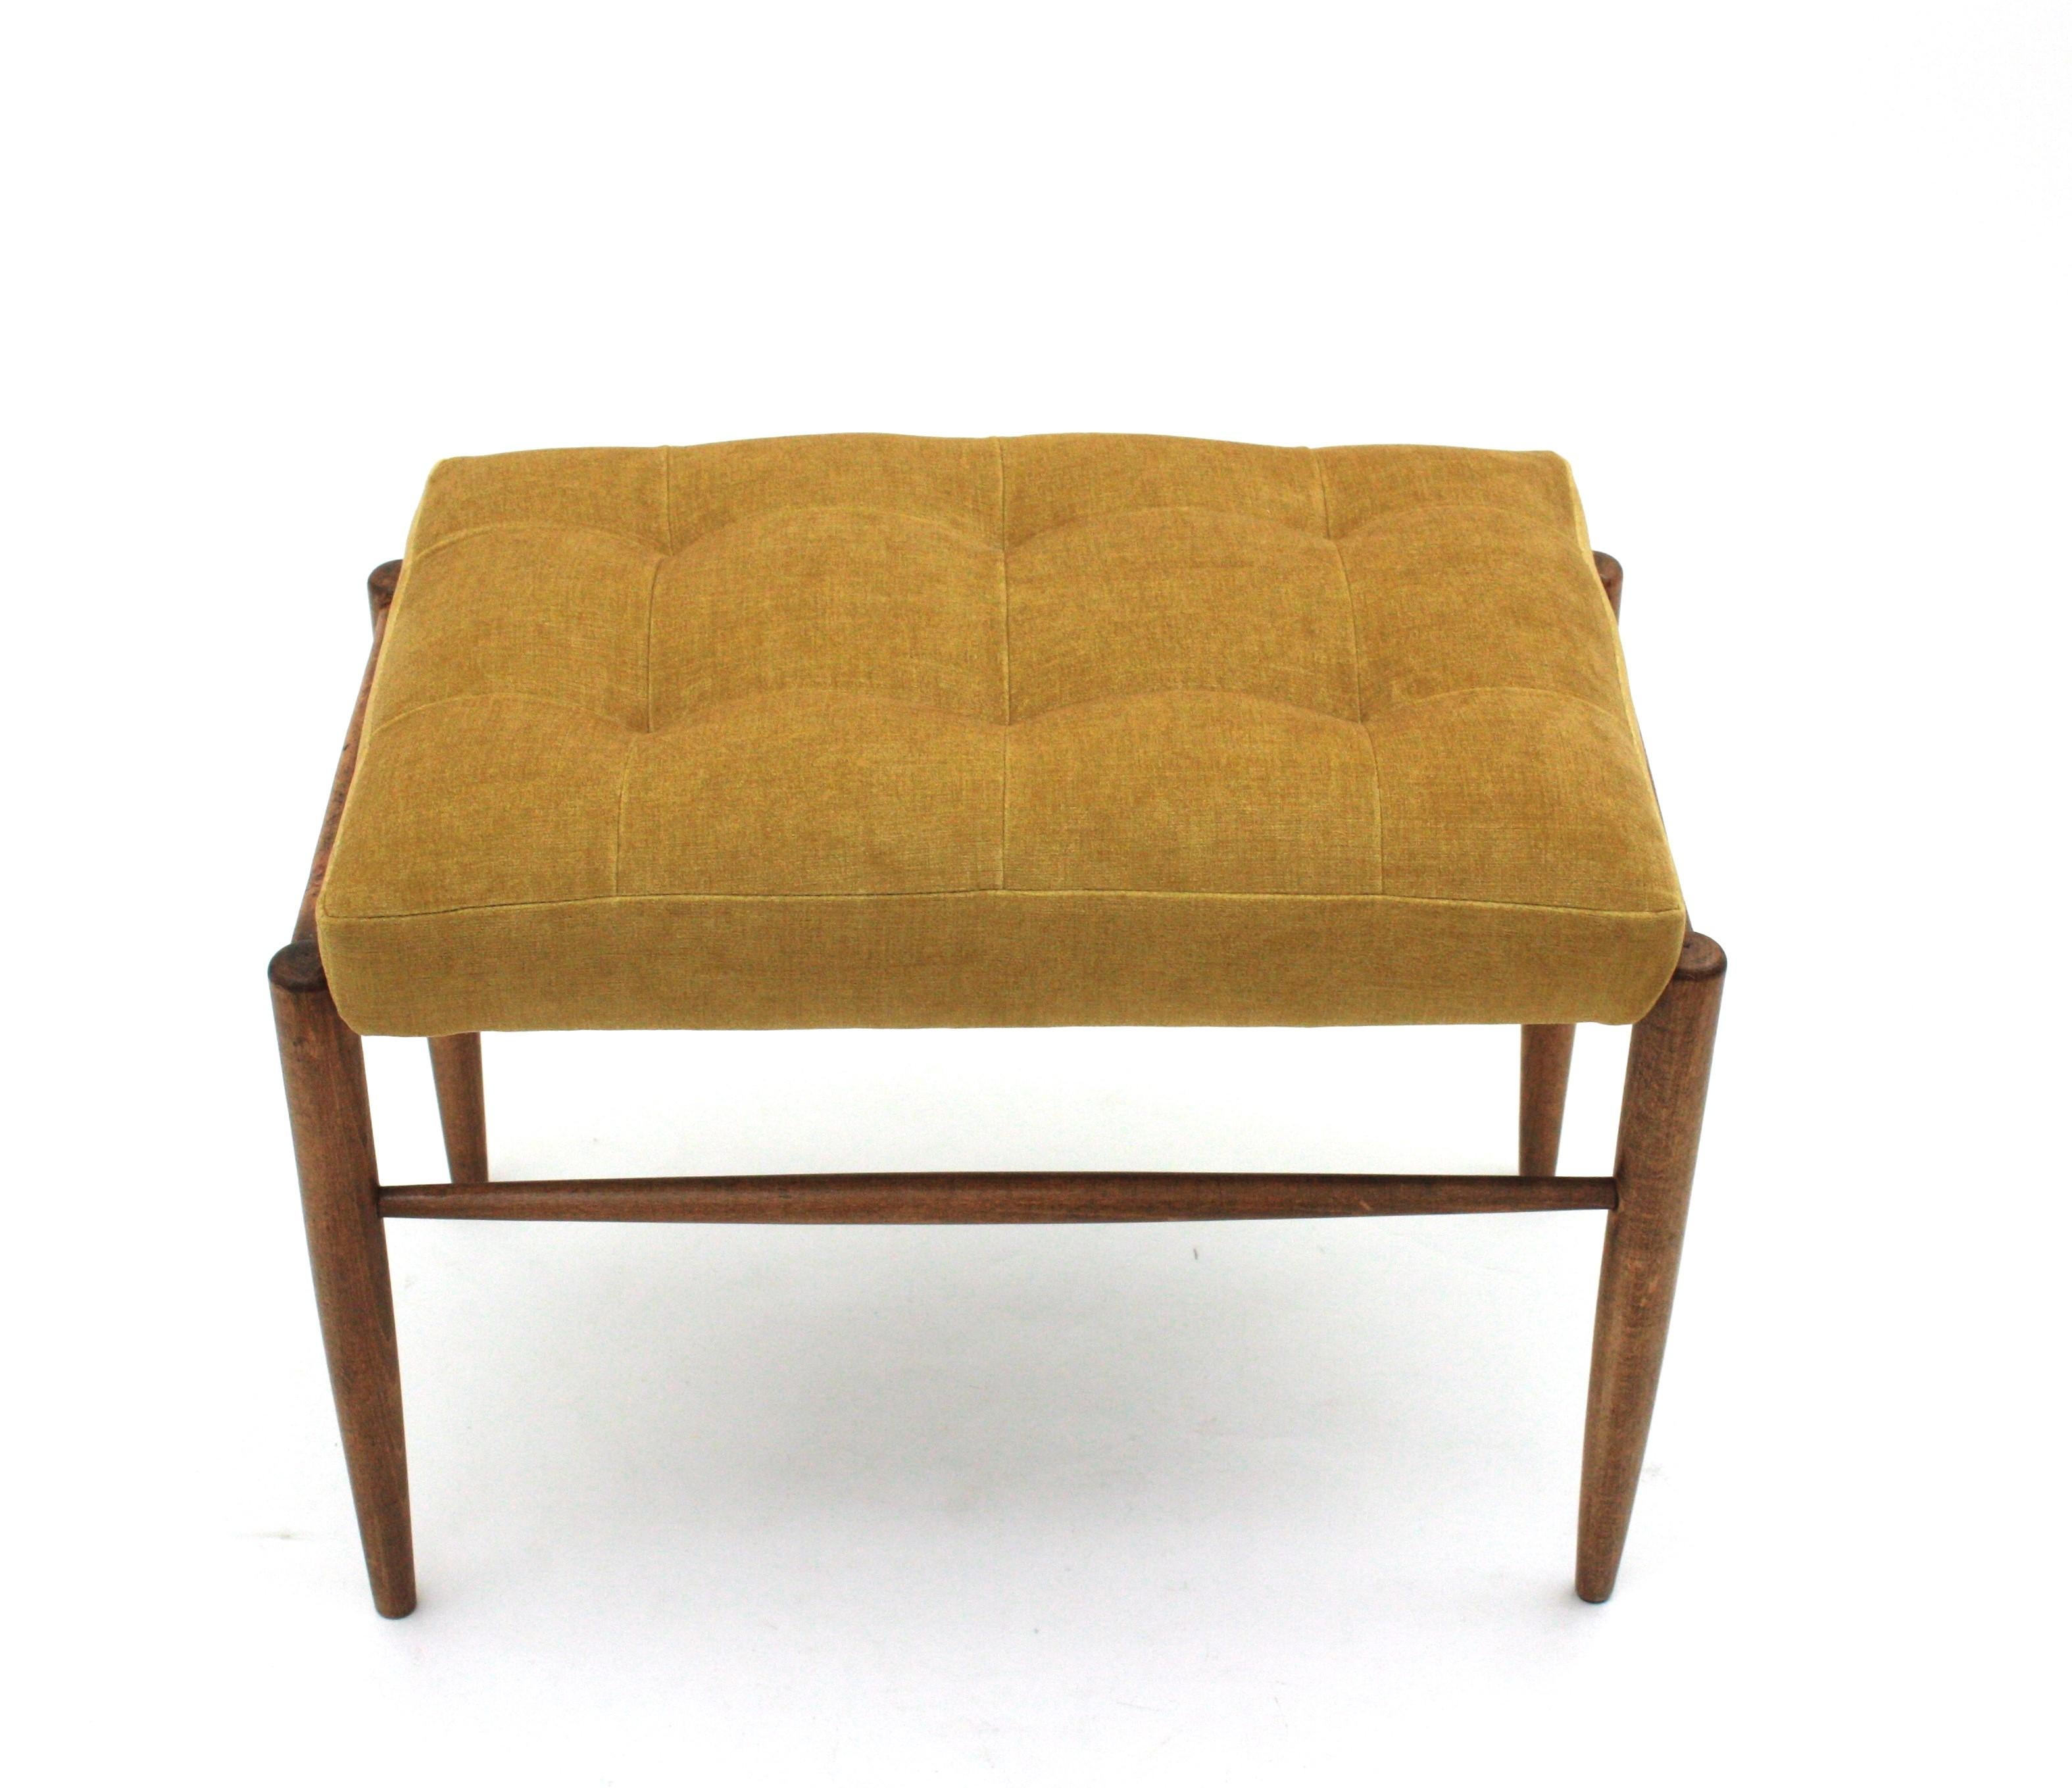 Wood Scandinavian Modern Stool Ottoman or Bench New Upholstered in Yellow Chenille For Sale